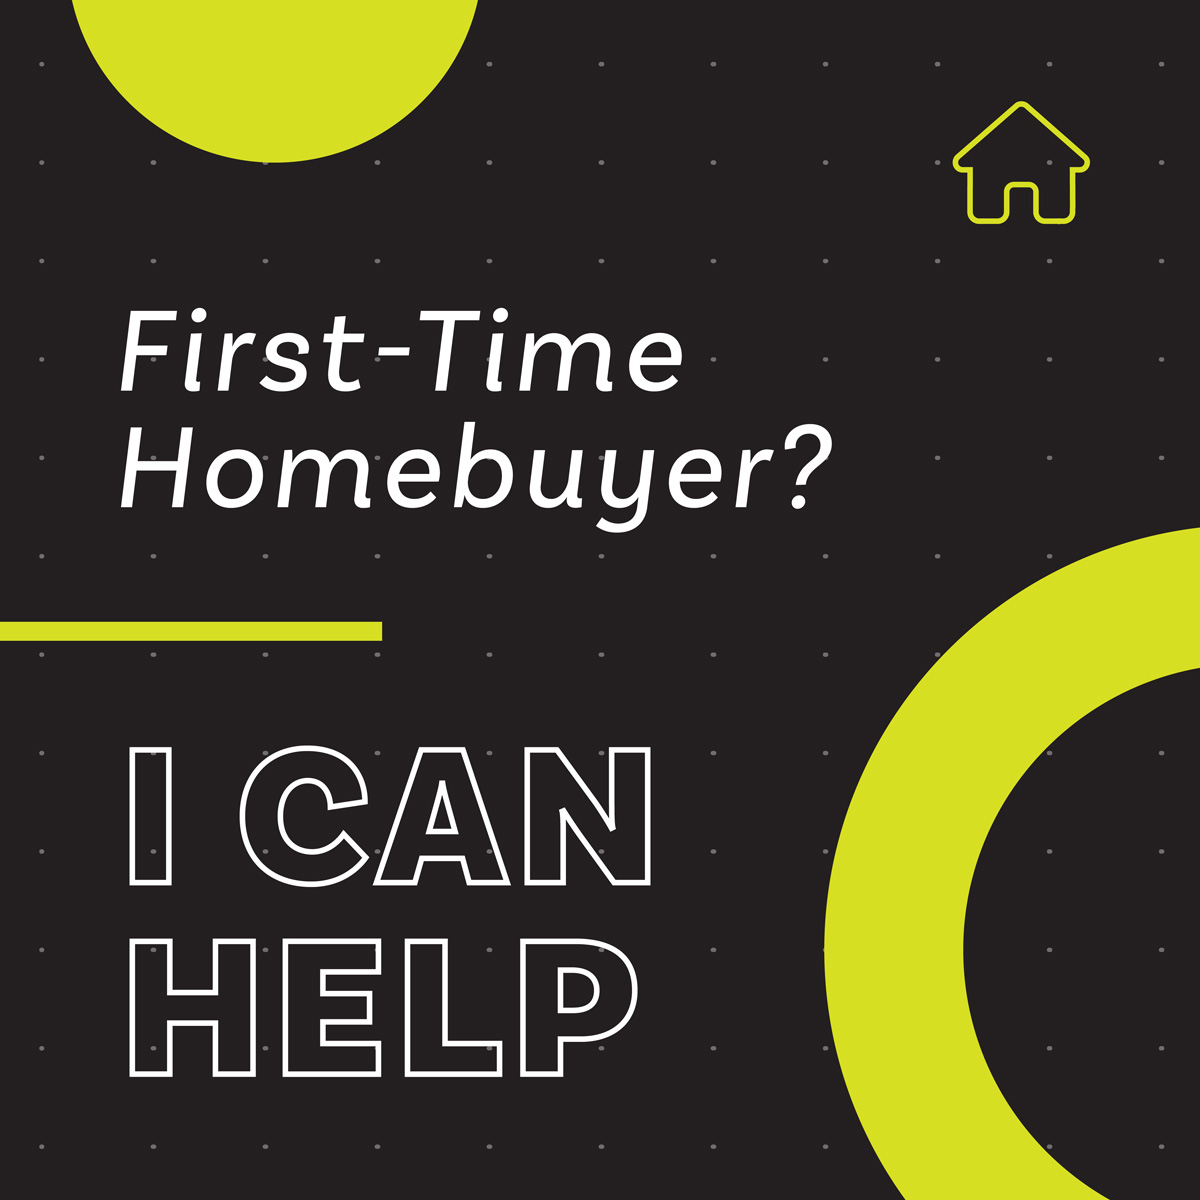 Rules for first-time homebuyers are changing in May! Work with me and I can help you get up to $2,500 toward your down payment and closing costs. Message me now.

#firstimehomebuyer #homeloanspecialist #homeloans #mortgage #wa #washington #id #idaho #savemoney #getpreapproved